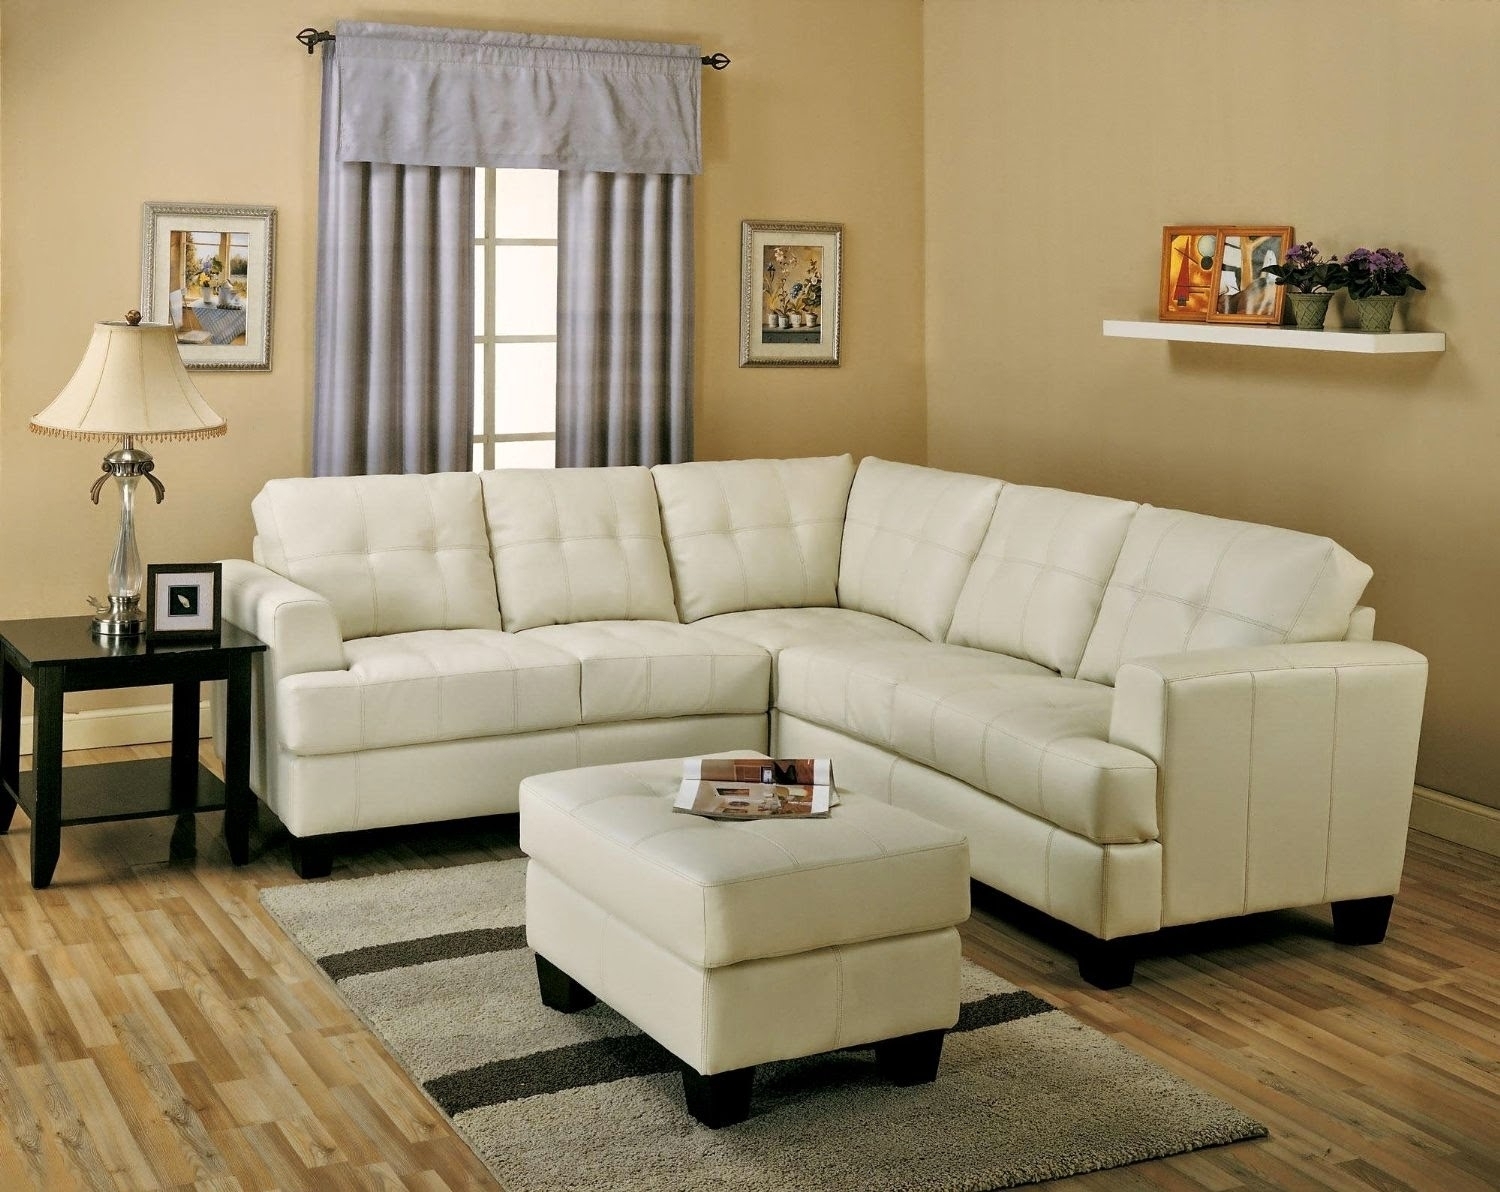 Leather Sectional Small Living Room Contemporary